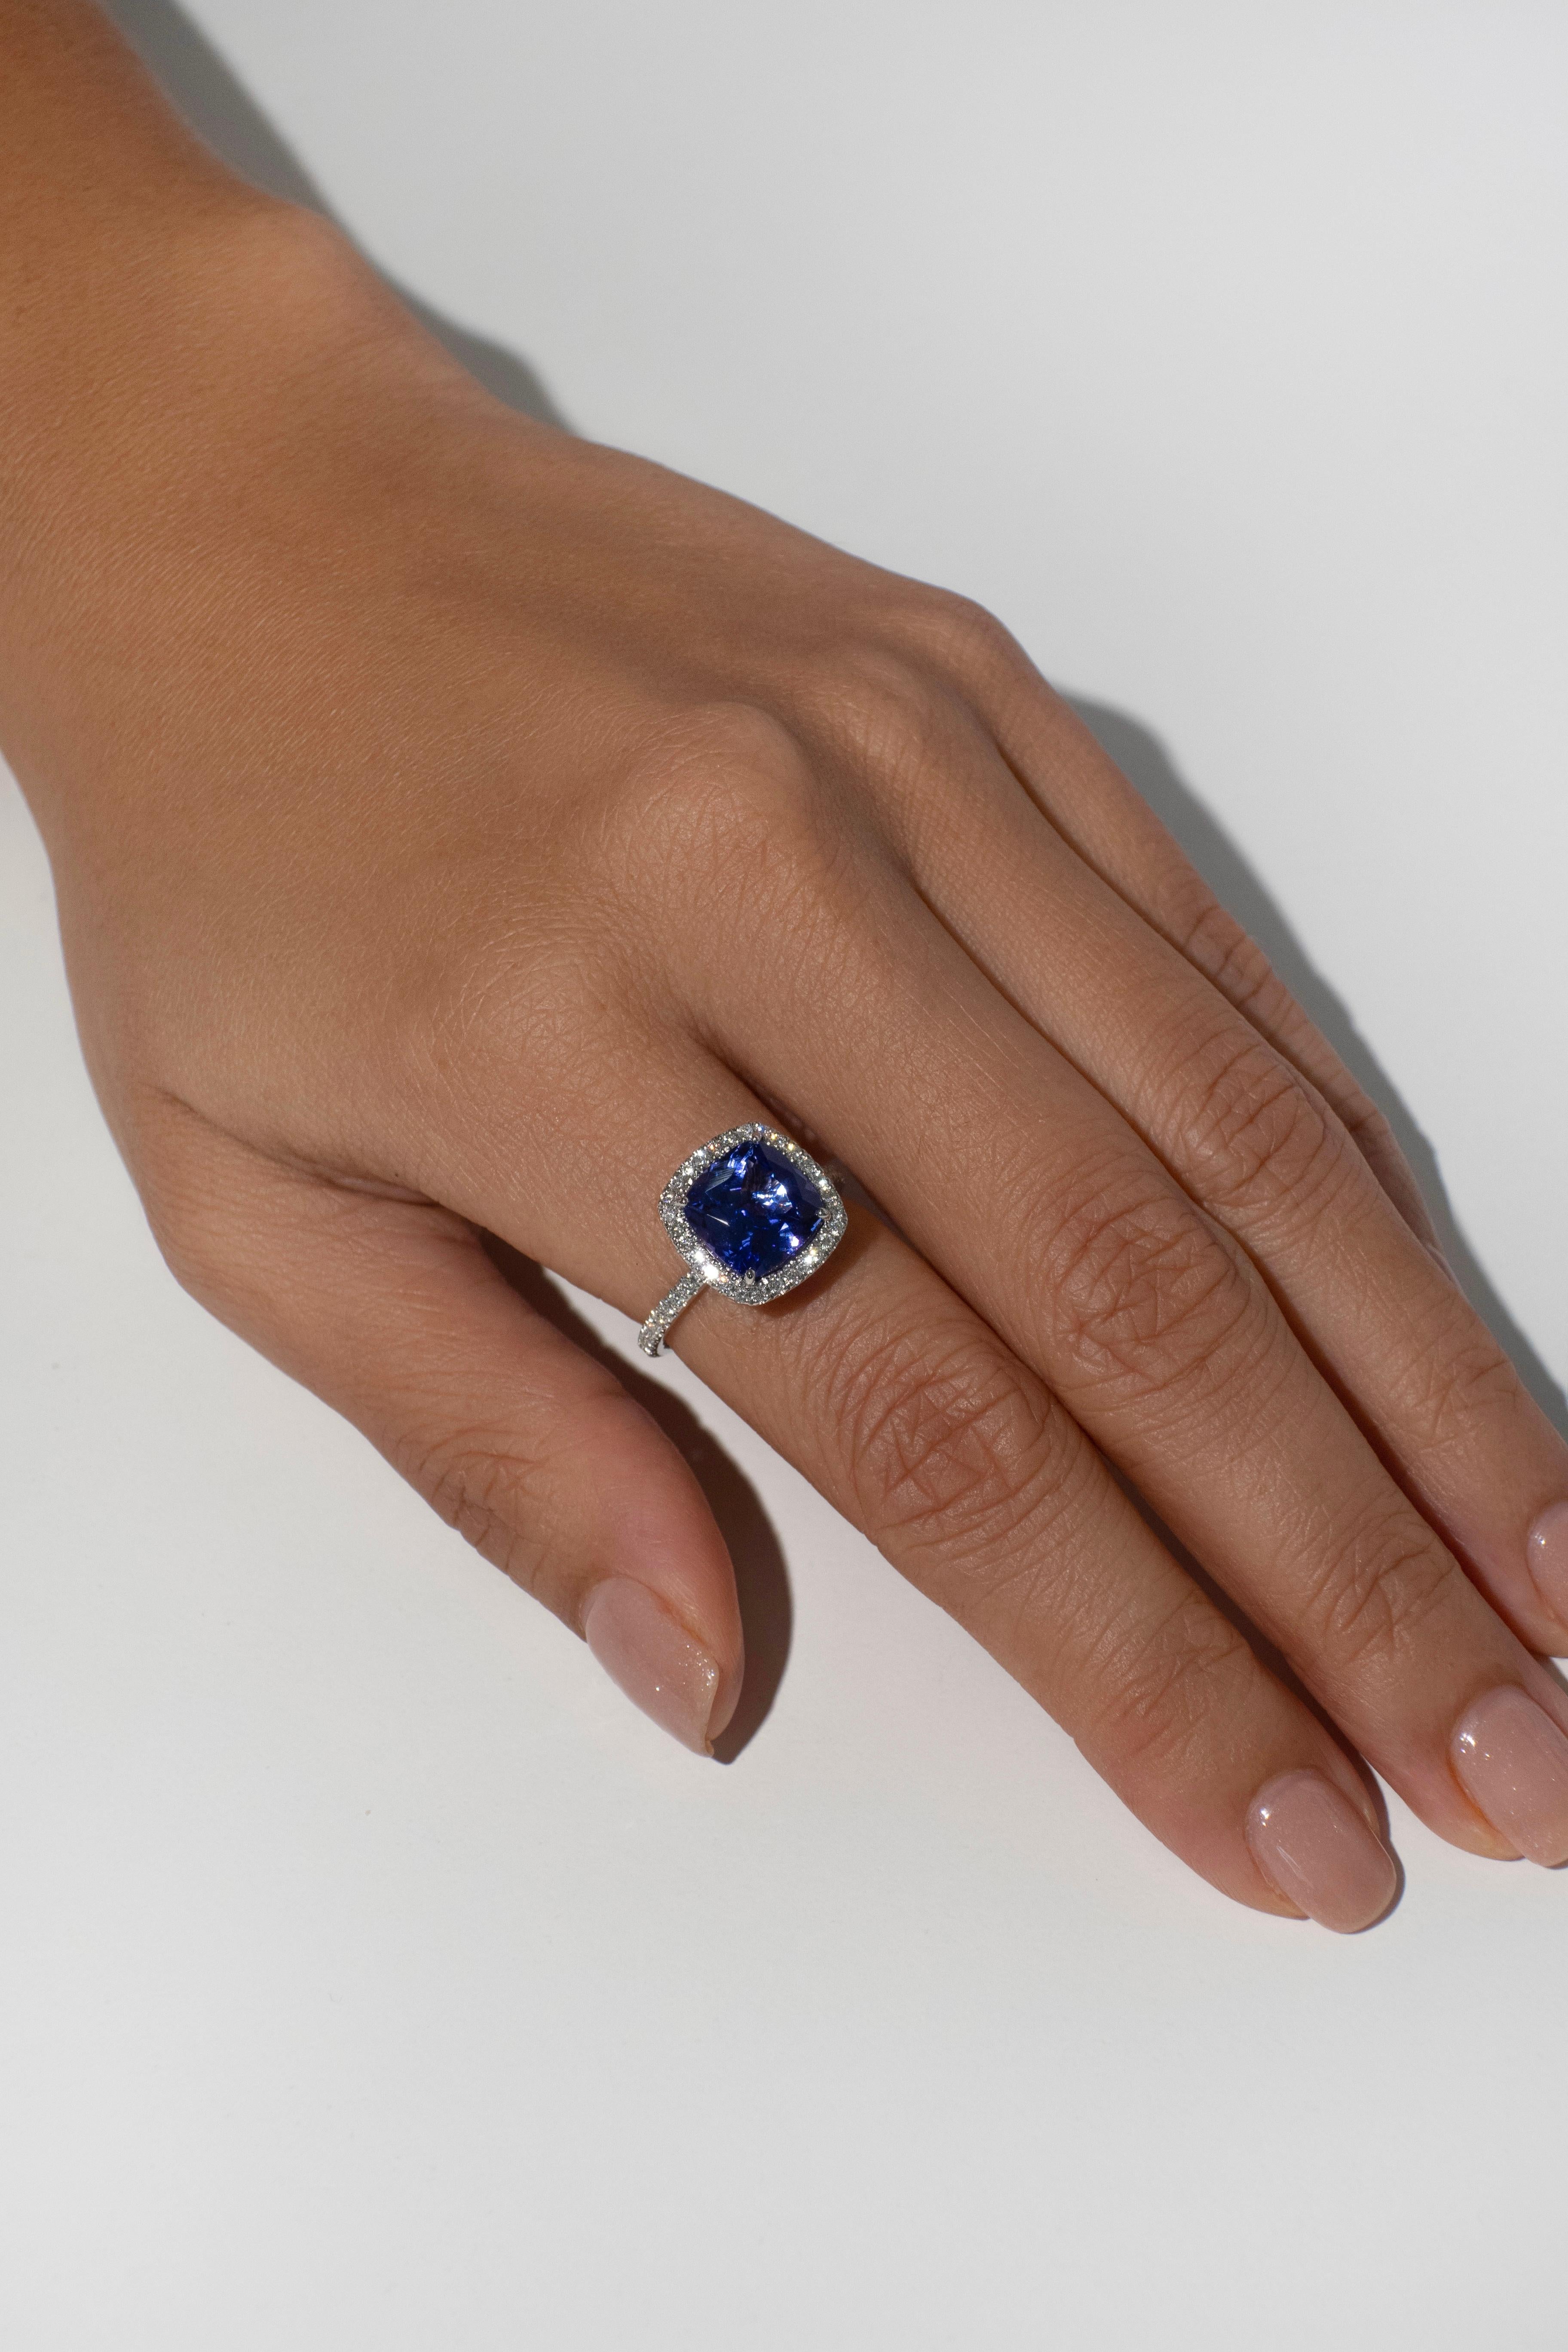 3.70 Carat Cushion Cut Tanzanite Ring with Diamond Halo Ring in 18k In New Condition For Sale In Bangkok, TH